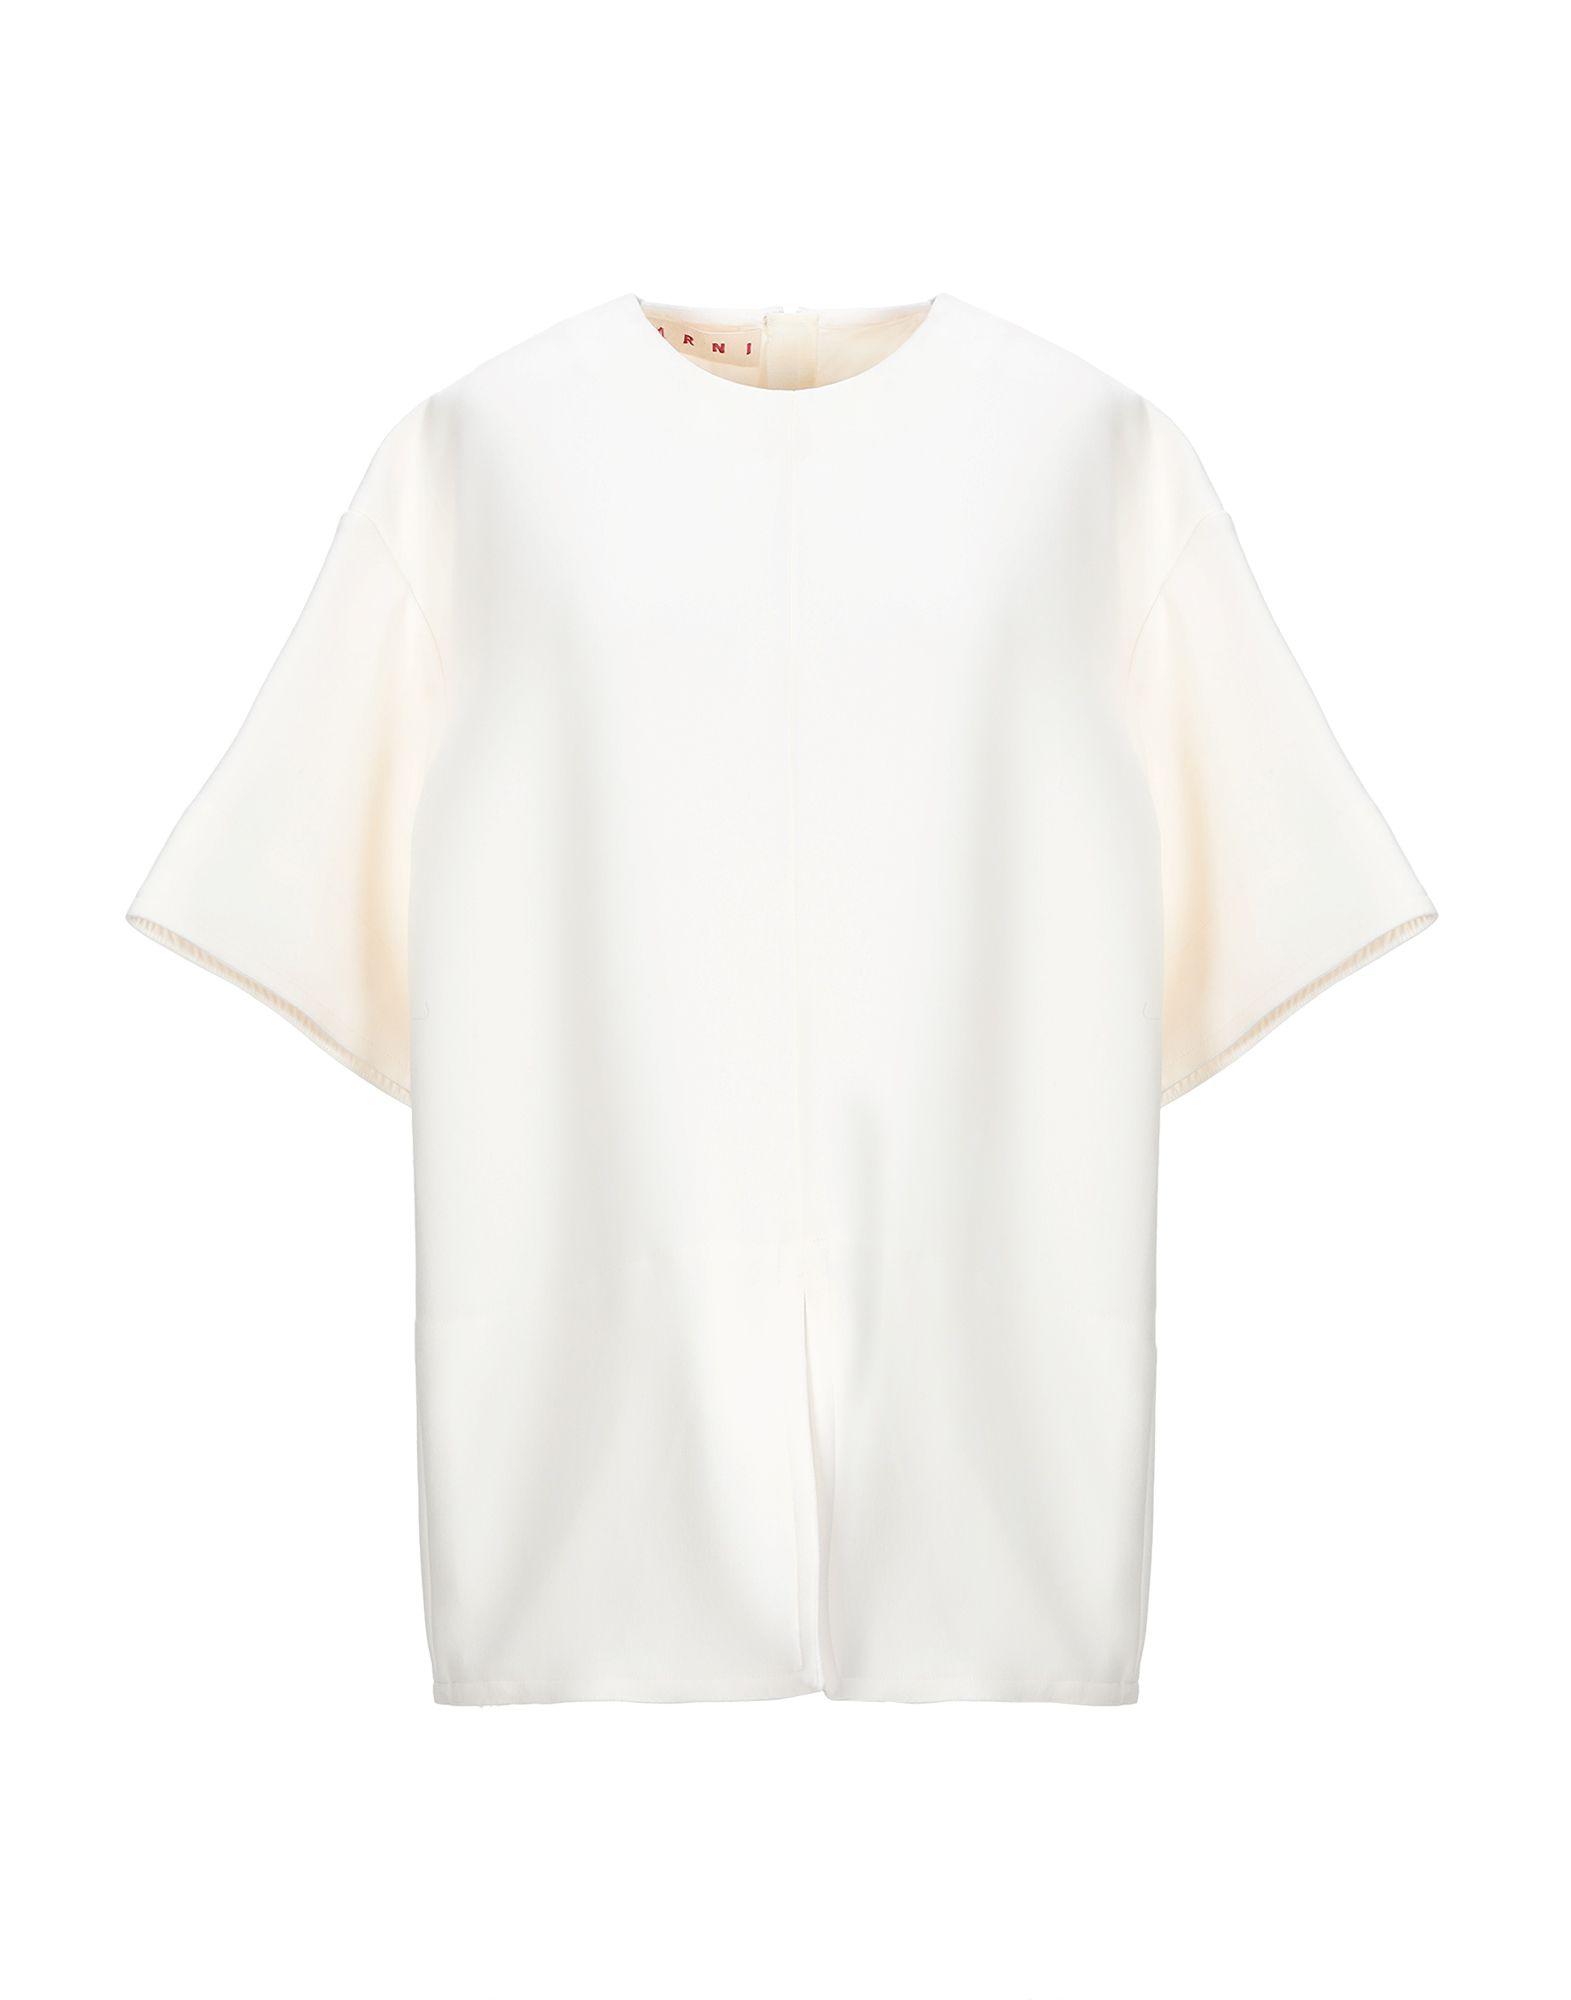 Marni Synthetic Blouse in Ivory (White) - Lyst